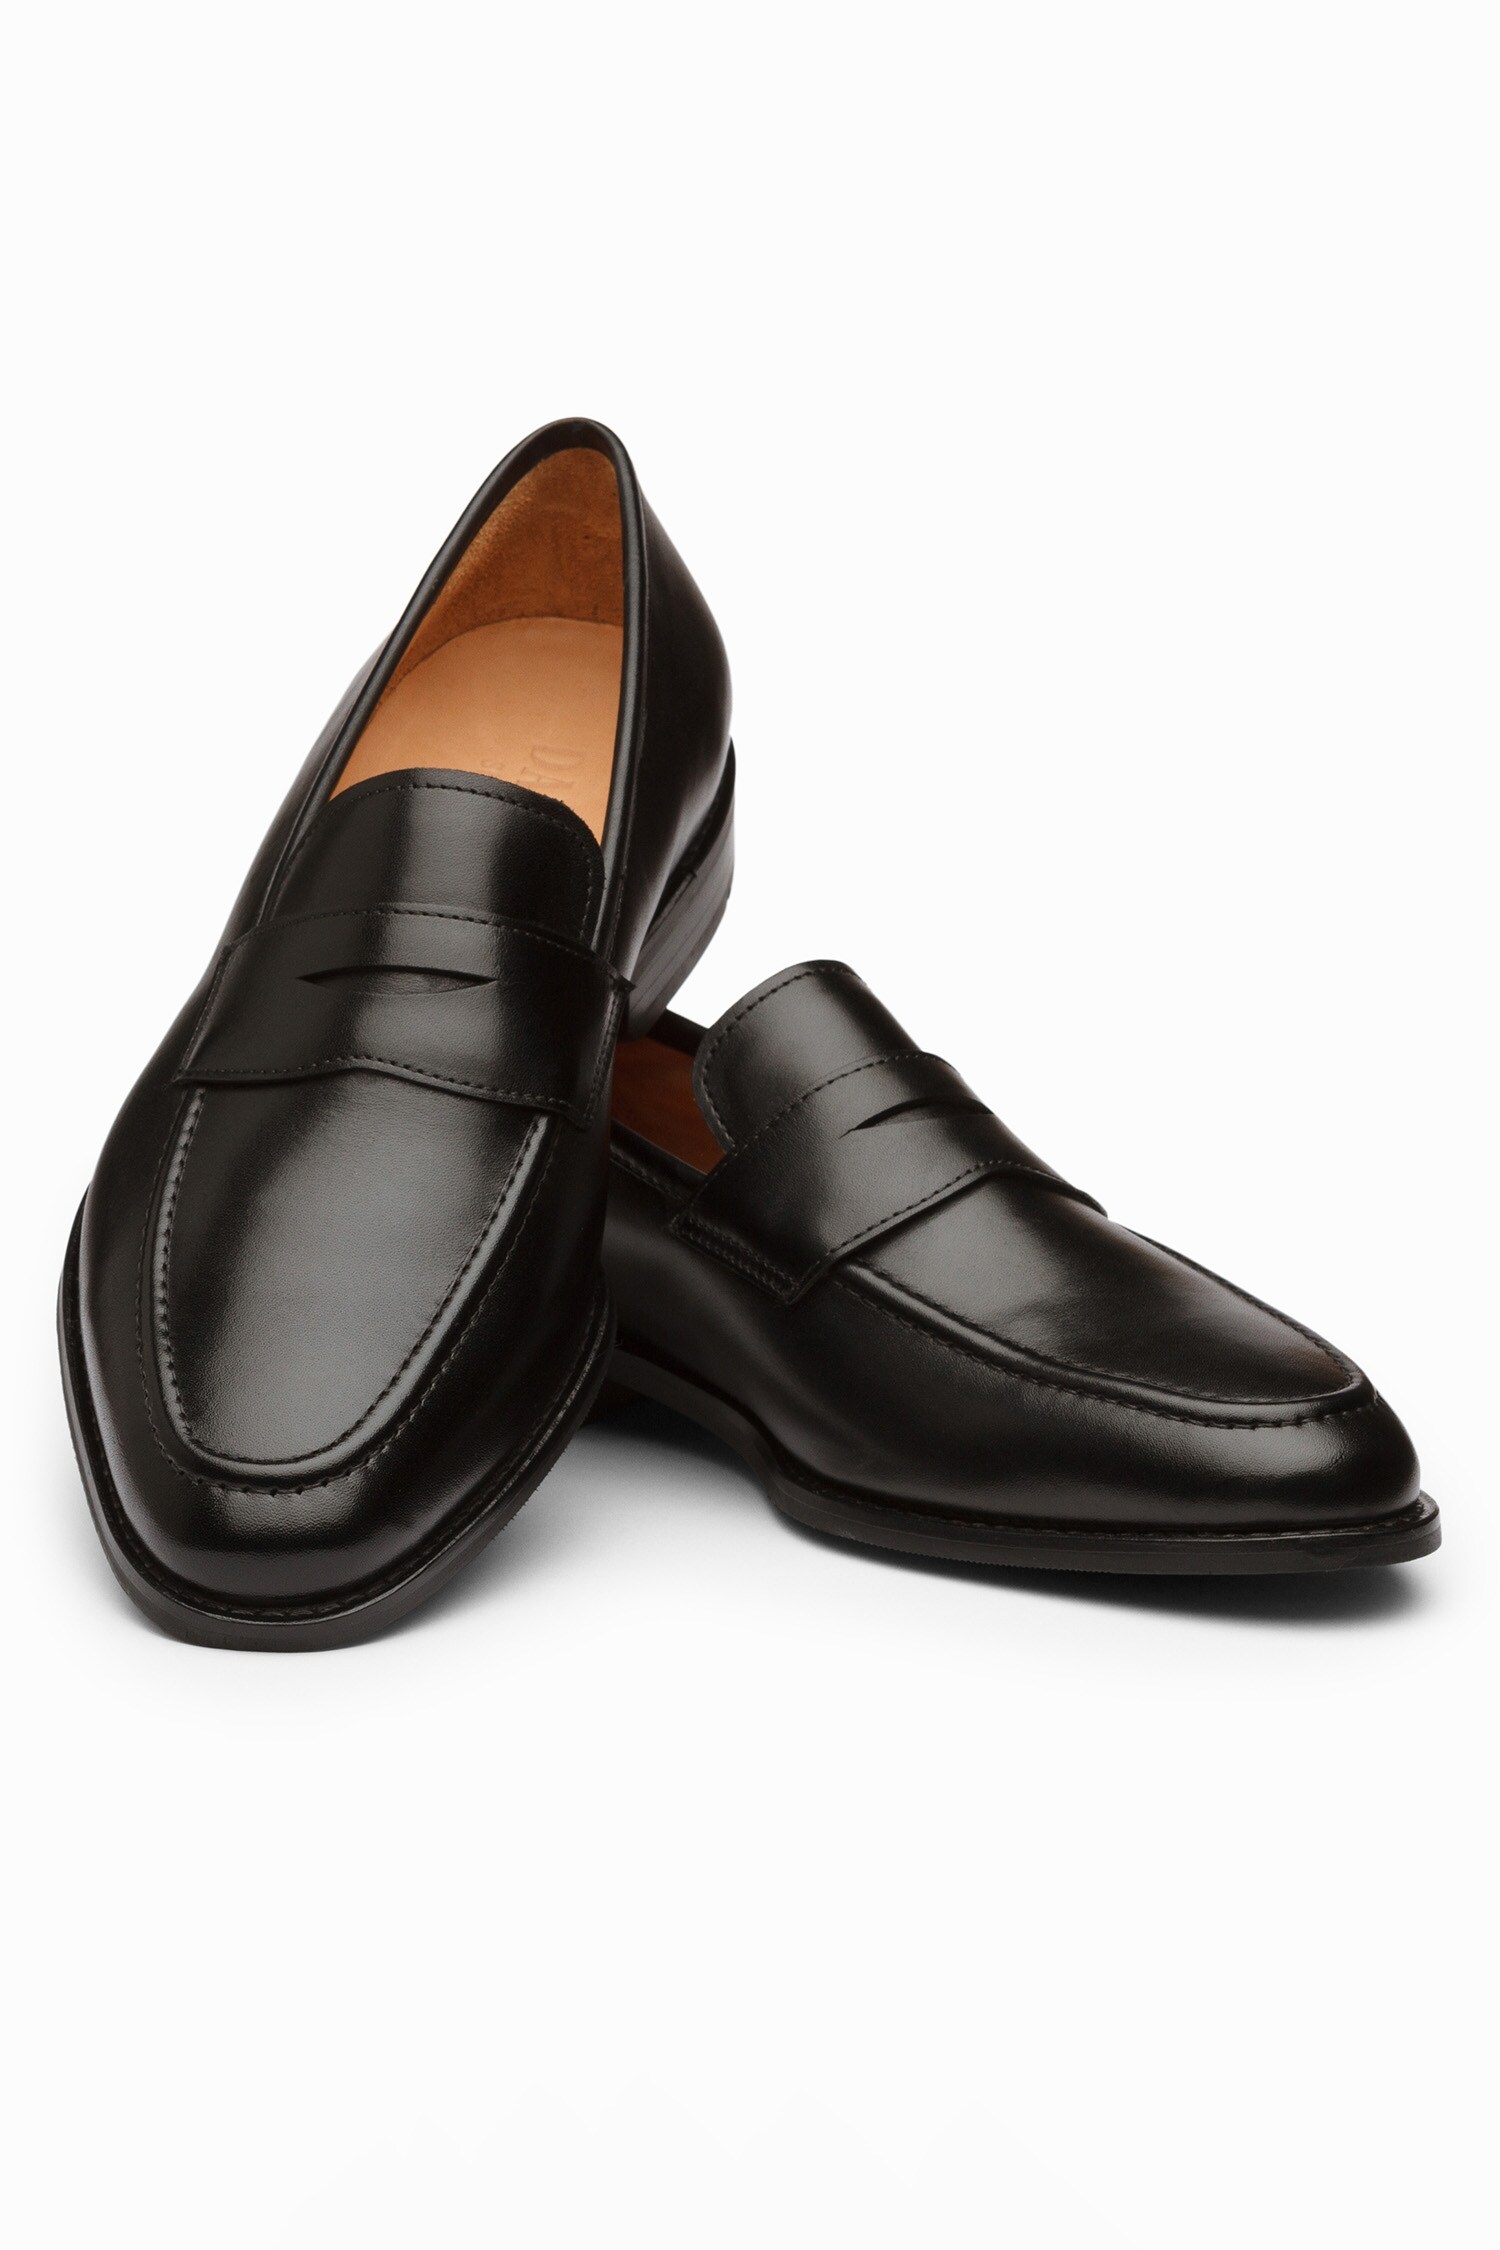 Buy Black Handcrafted Penny Loafers For Men by dapper Shoes Online at ...